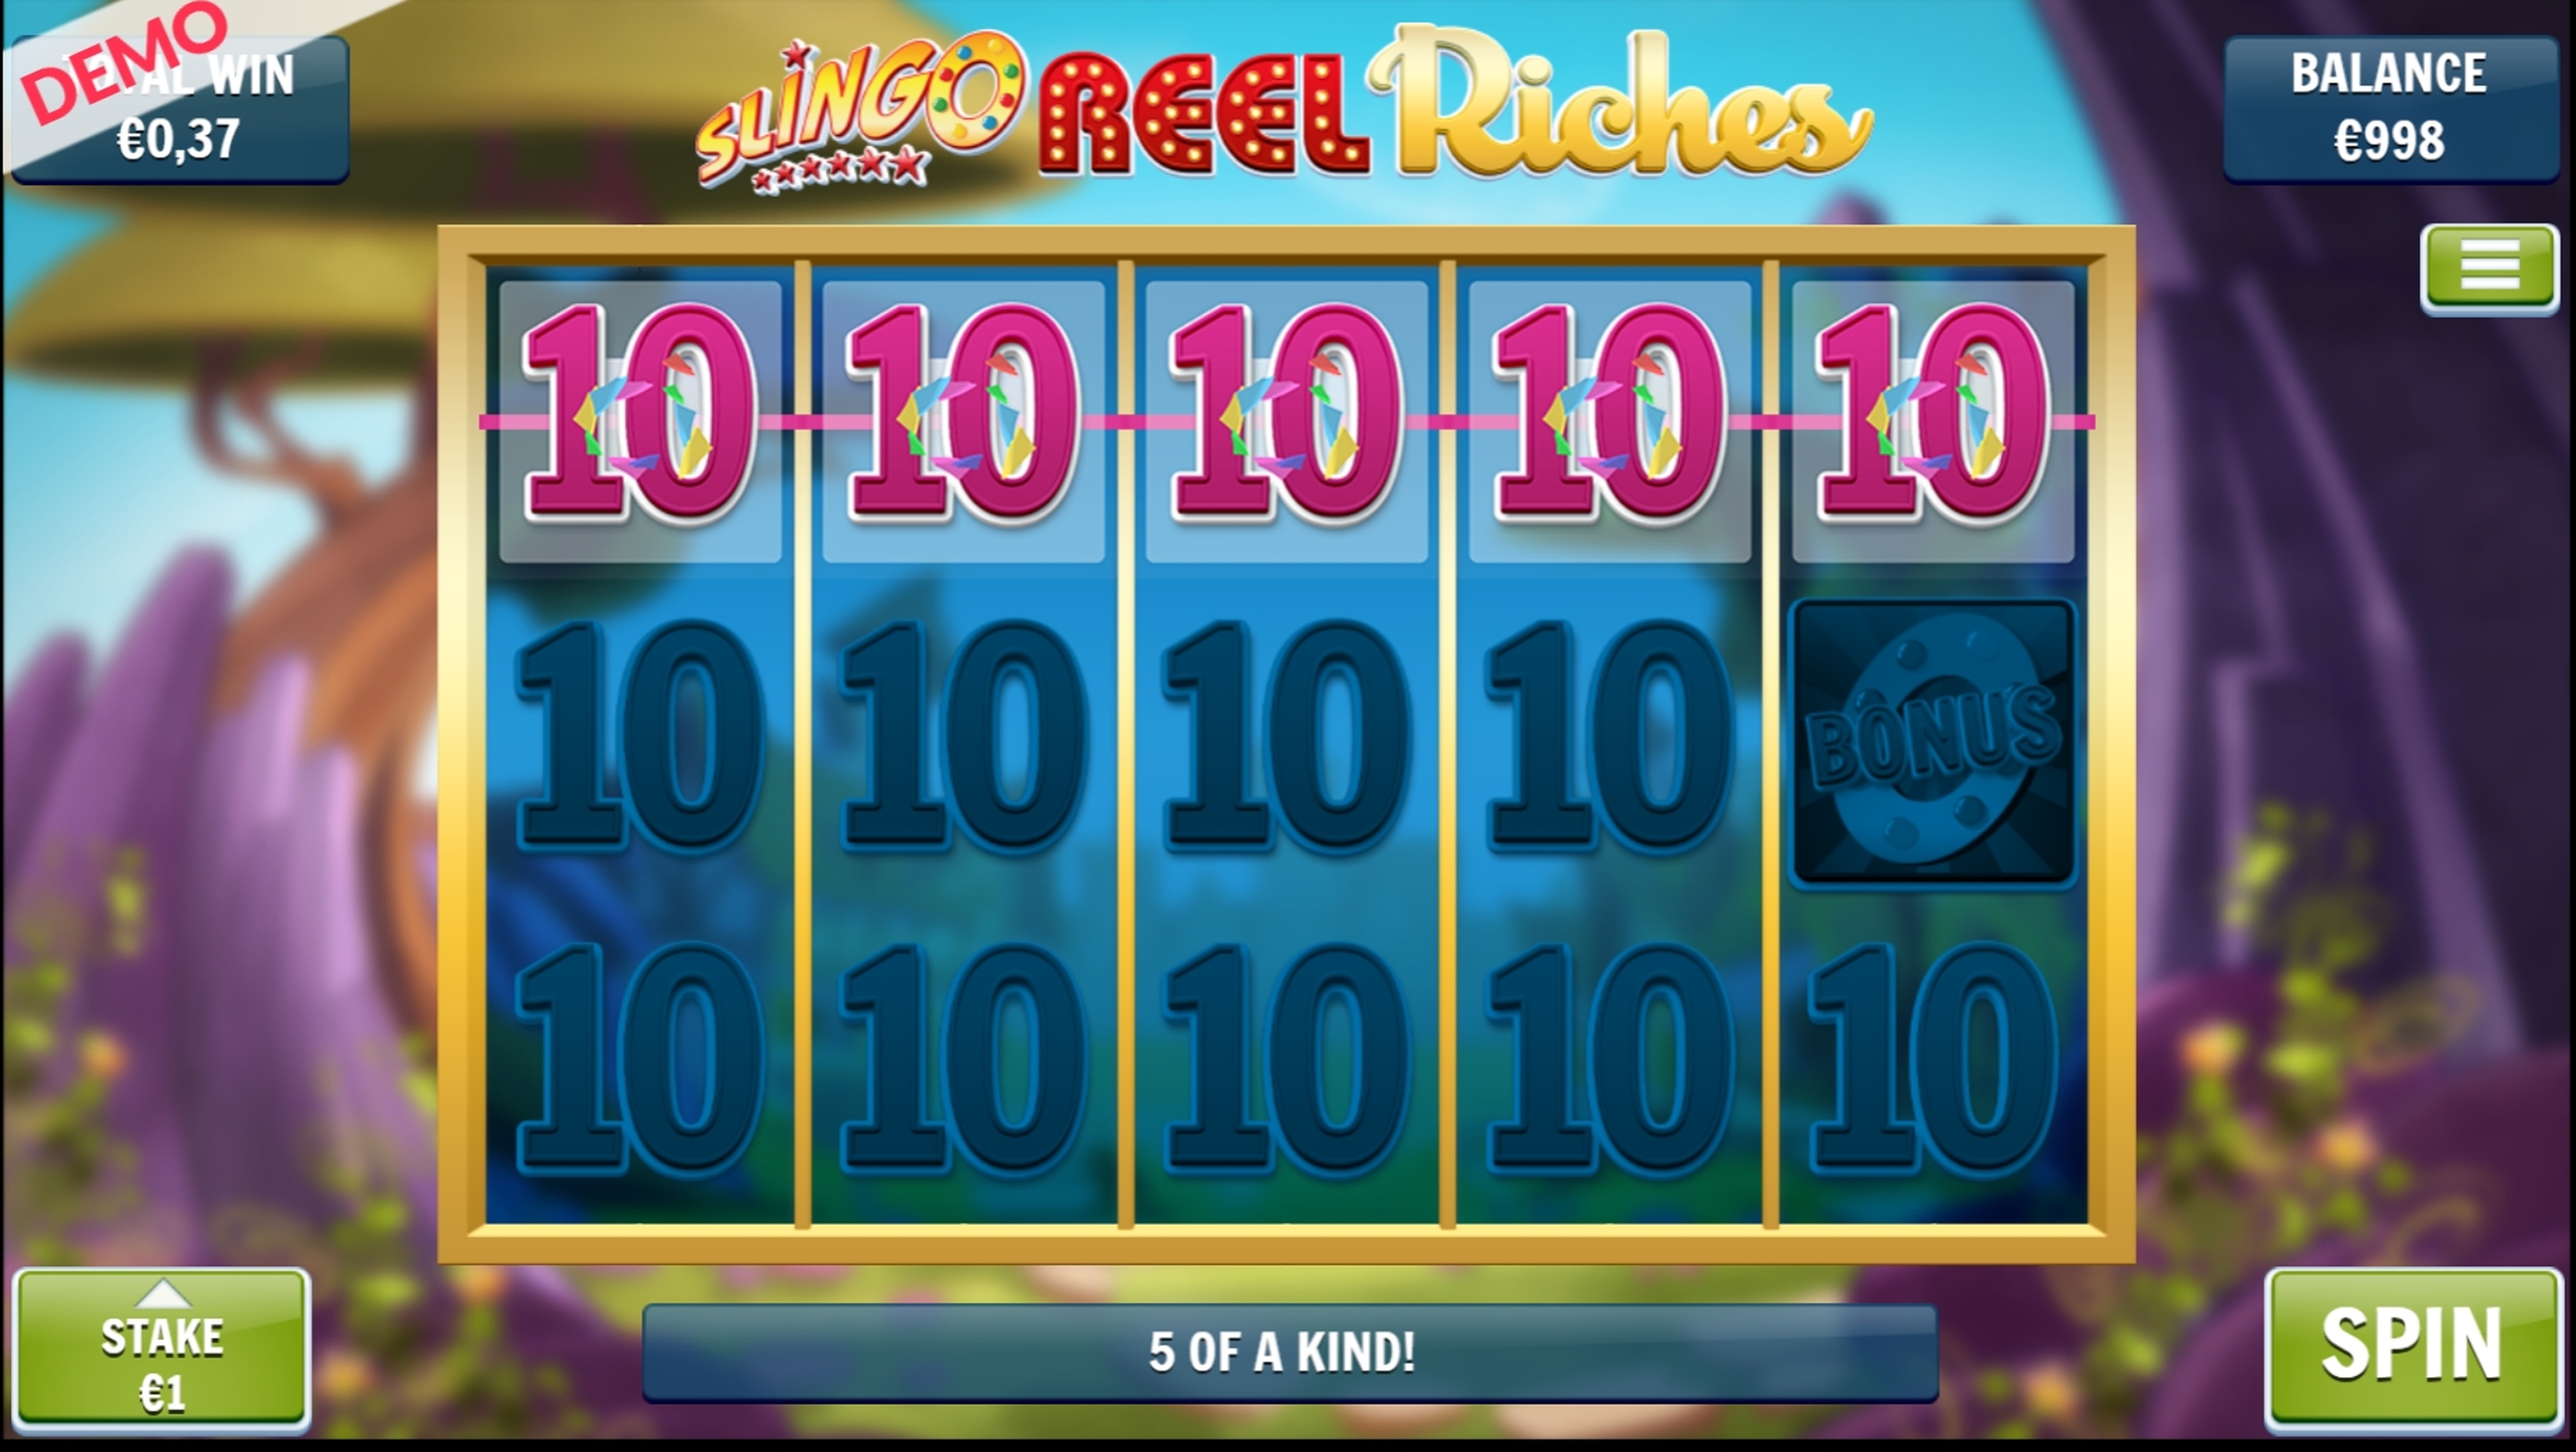 Win Money in Slingo Reel Riches Free Slot Game by Slingo